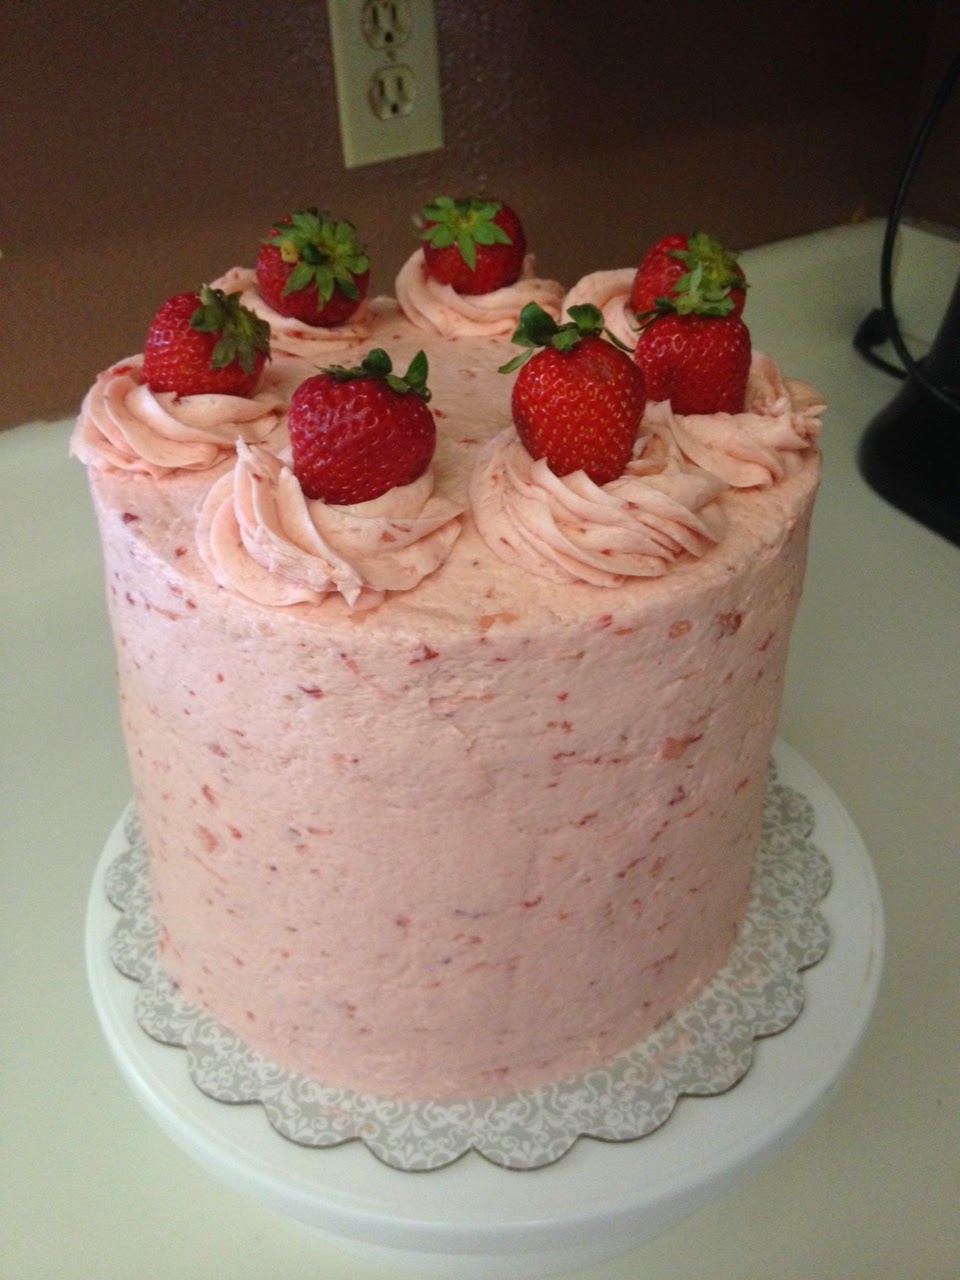 Oven Delights: Strawberry Mousse Cake